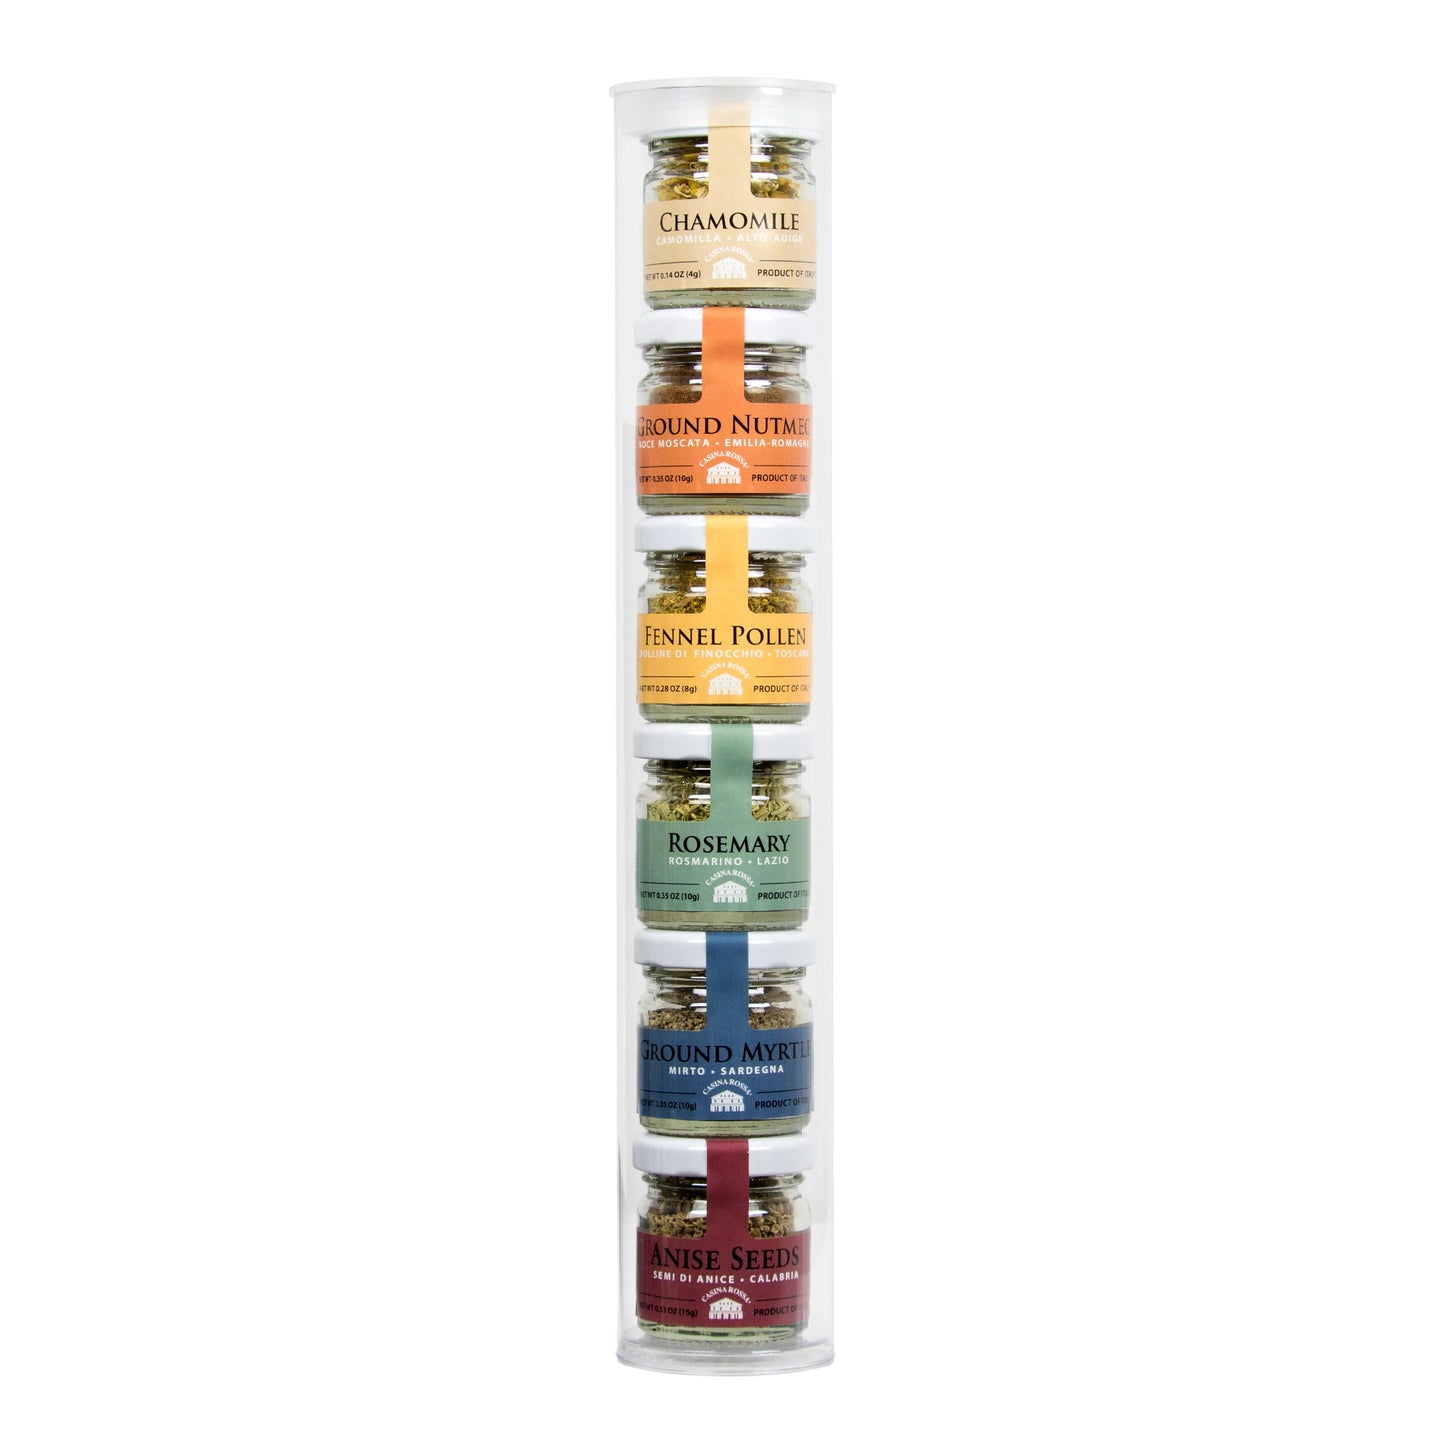 Casina Rossa Spices of Italy, set of 6